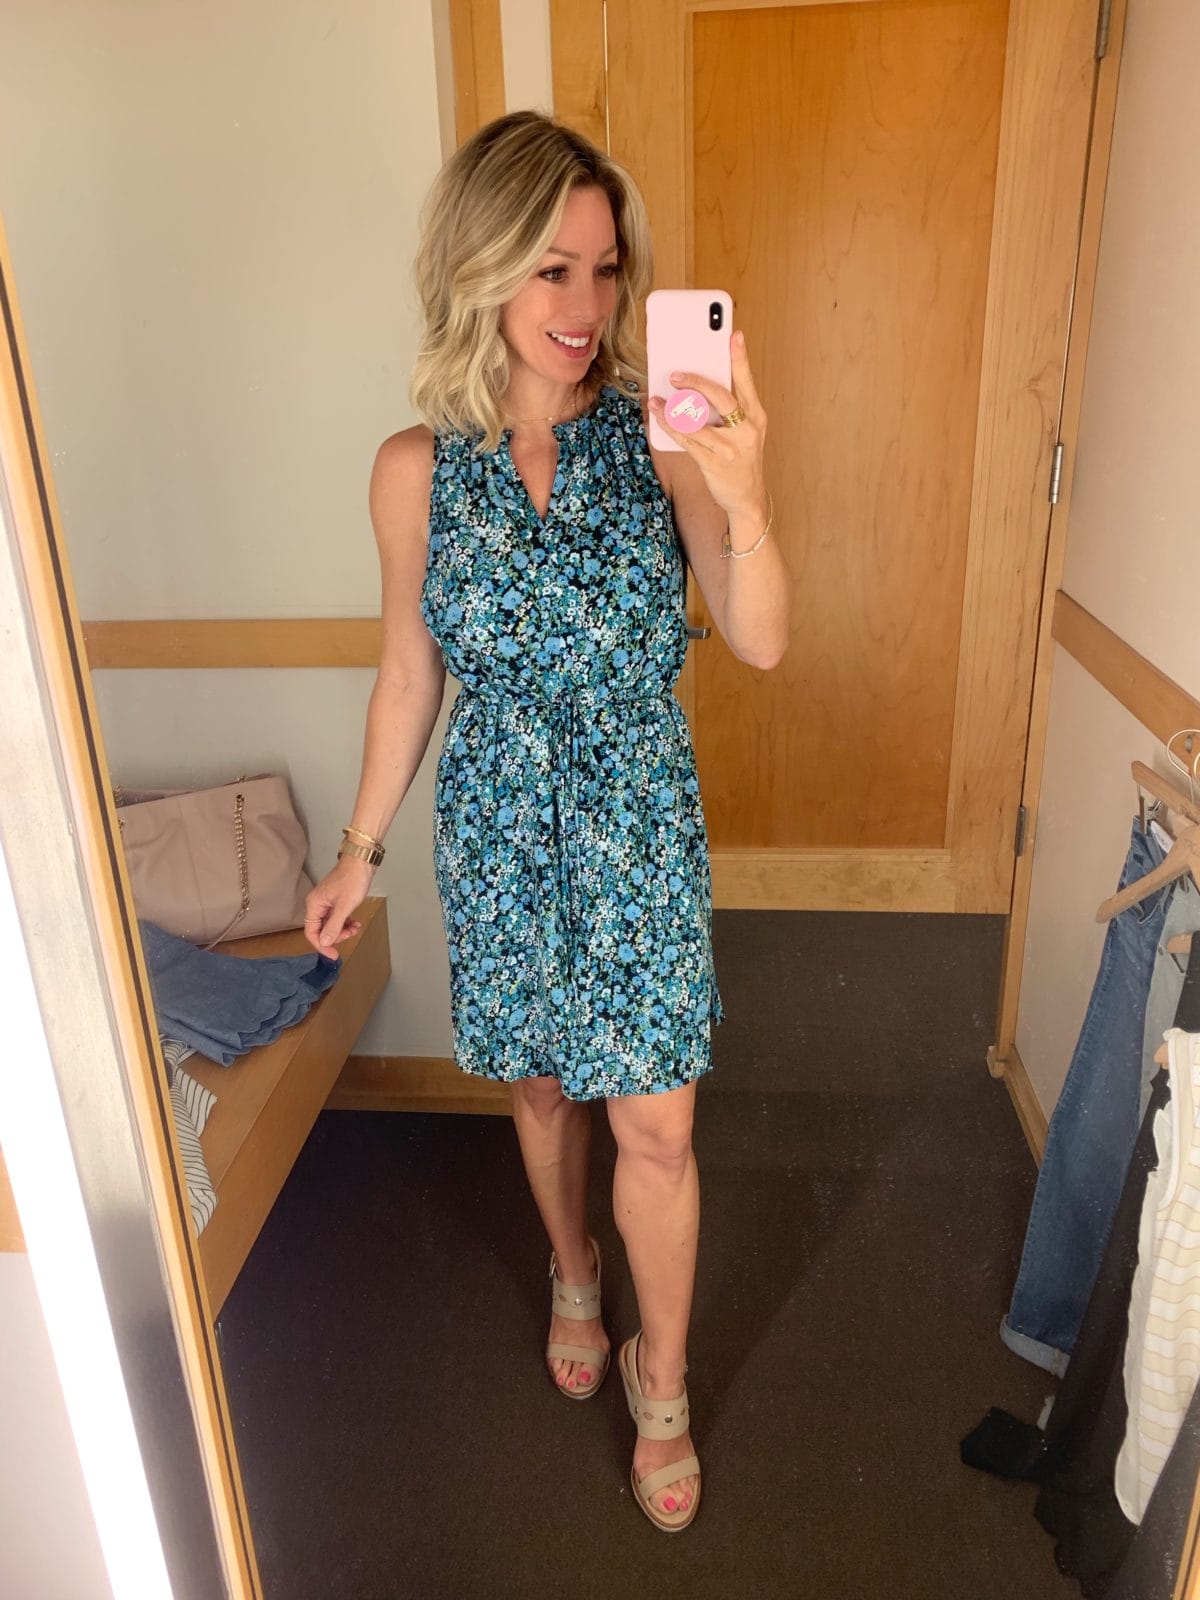 Mini Dresses with Nordstrom Rack - The Motherchic